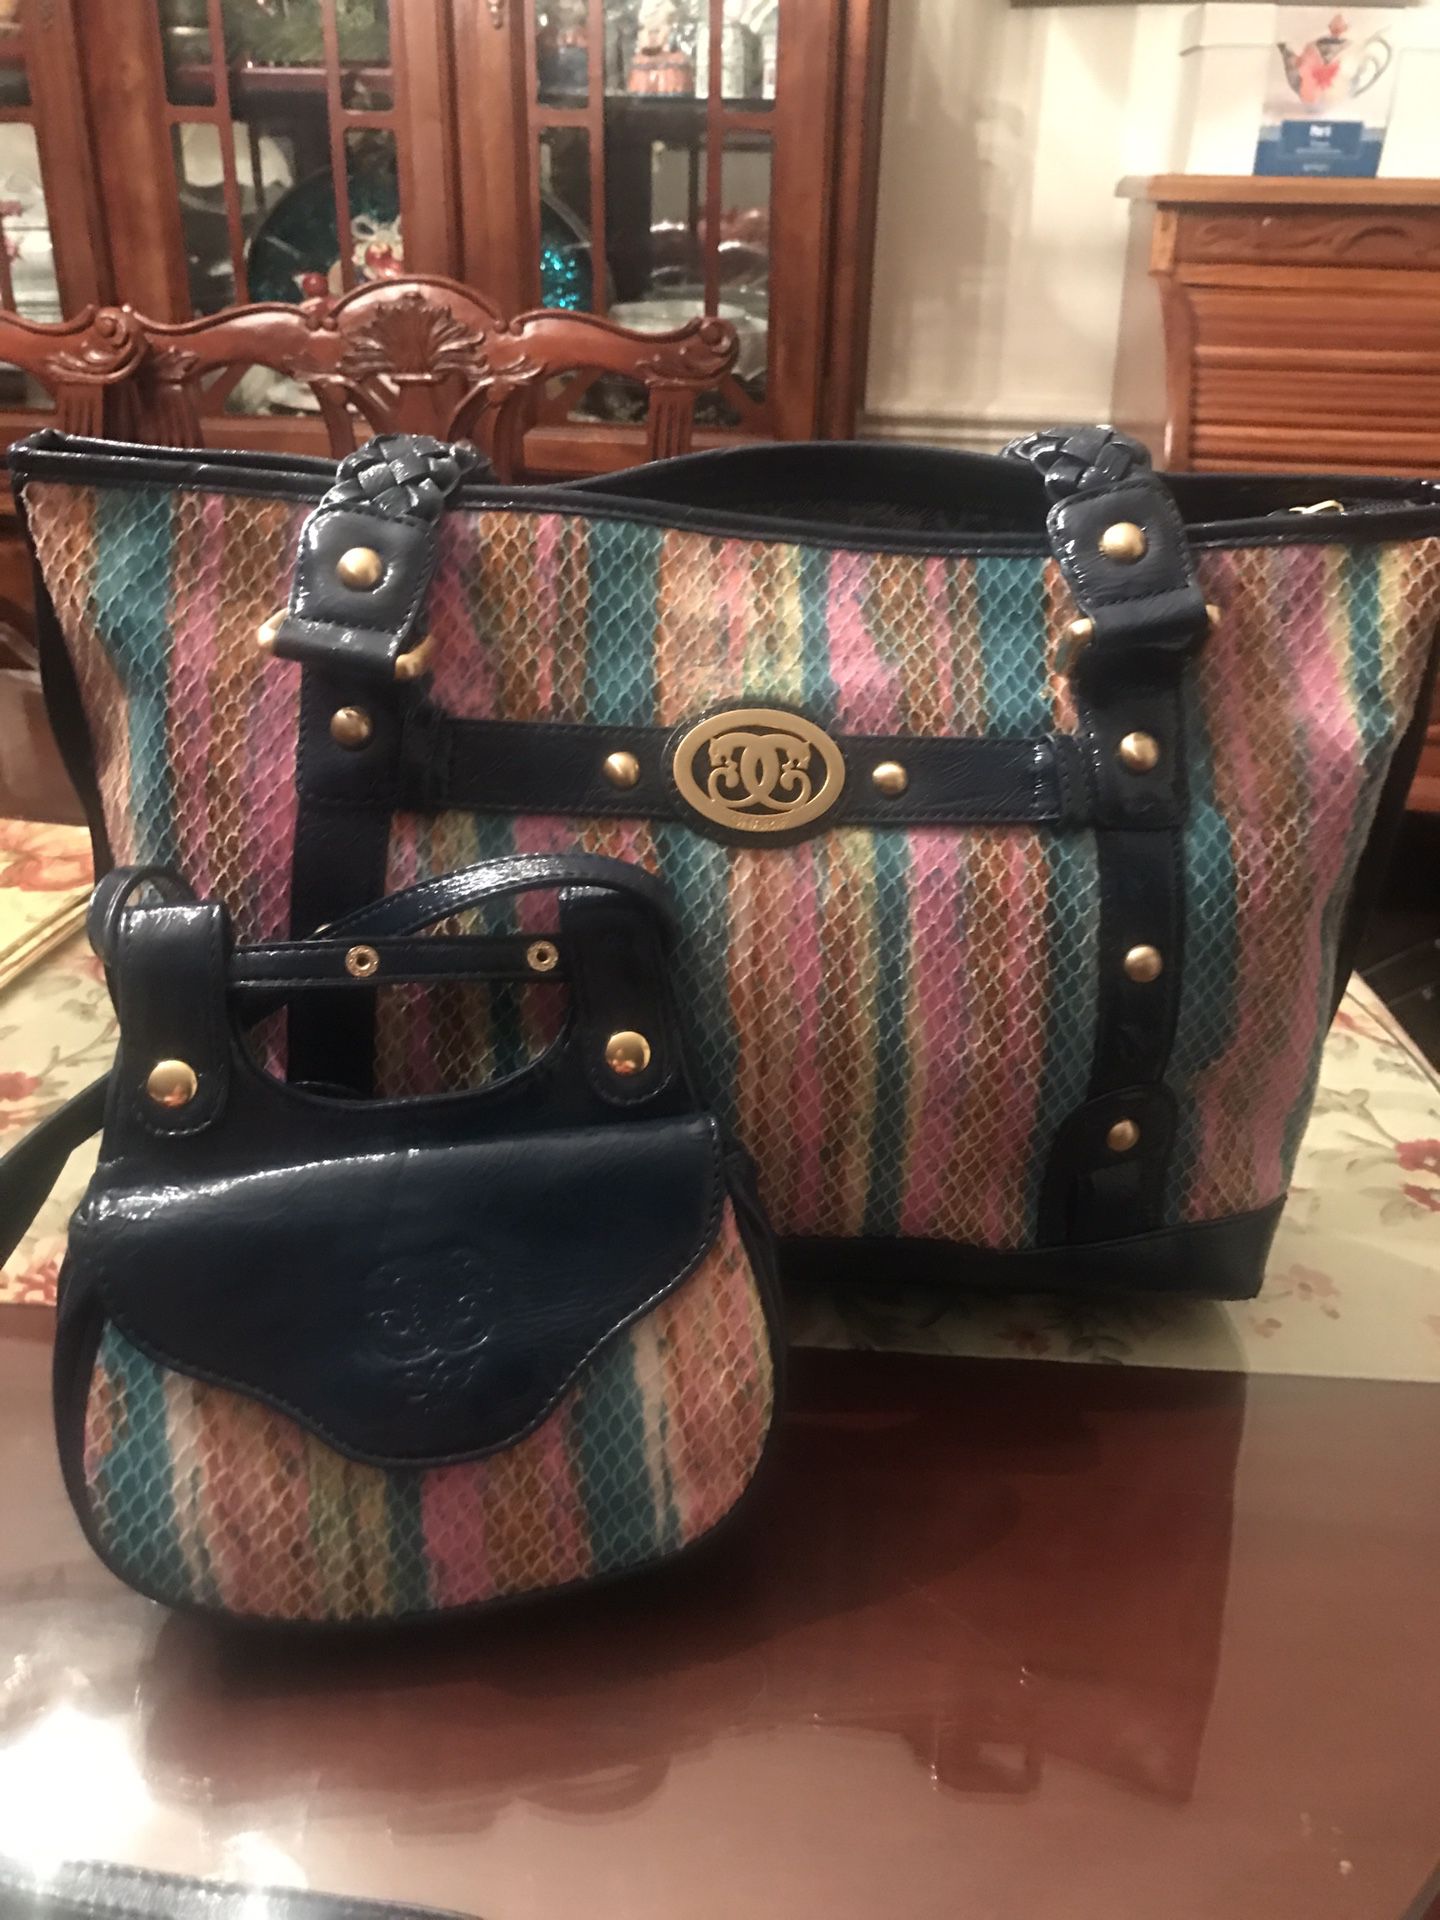 Sharif purse with matching small bag